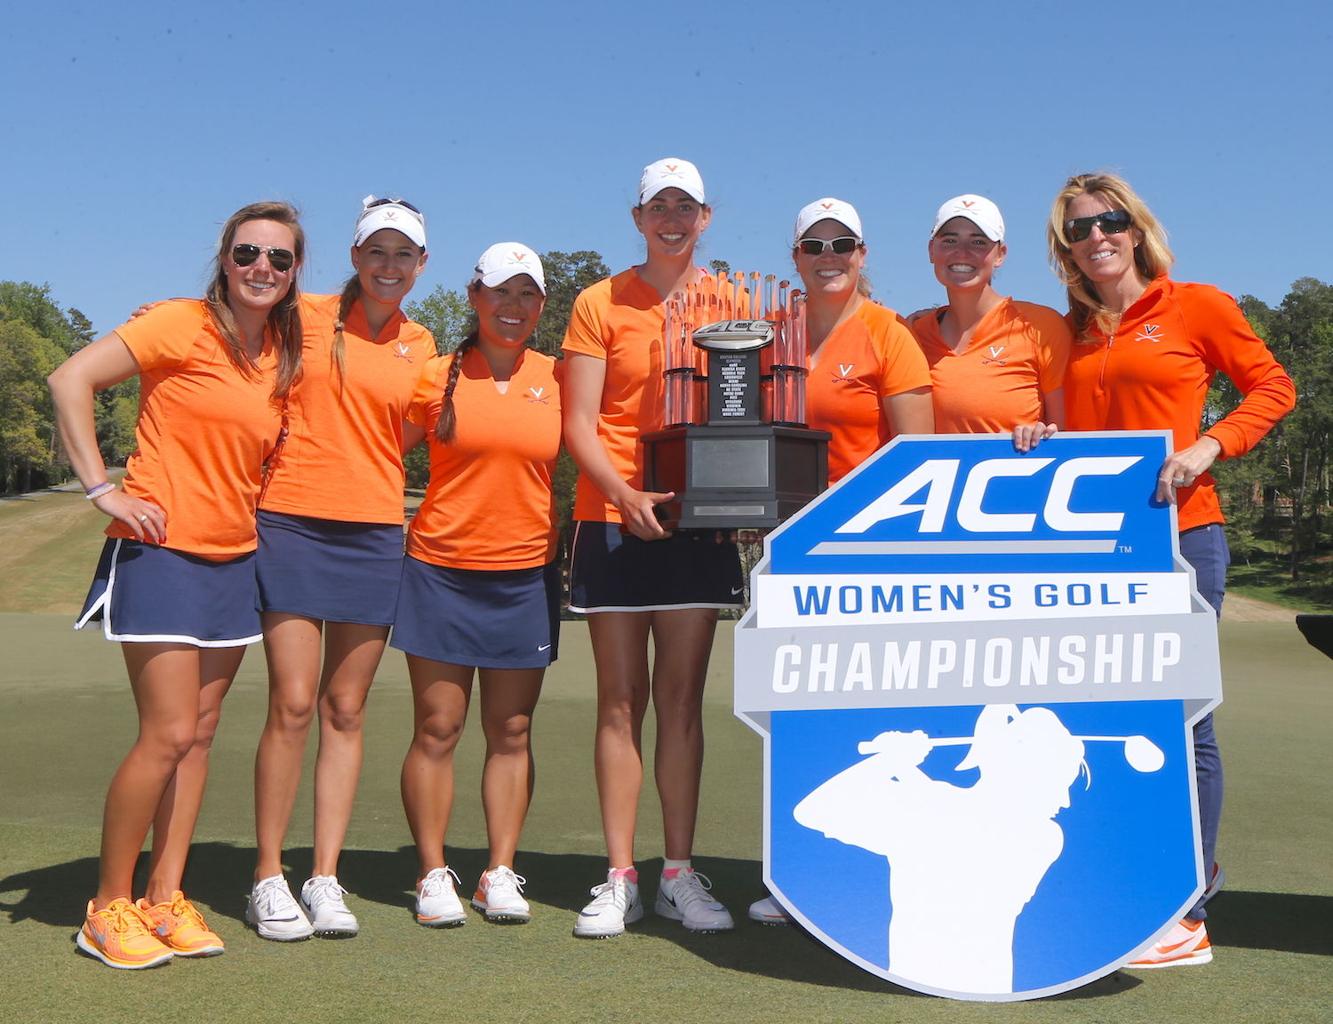 Coughlin says yes after UVa wins ACC women's golf title cavalier